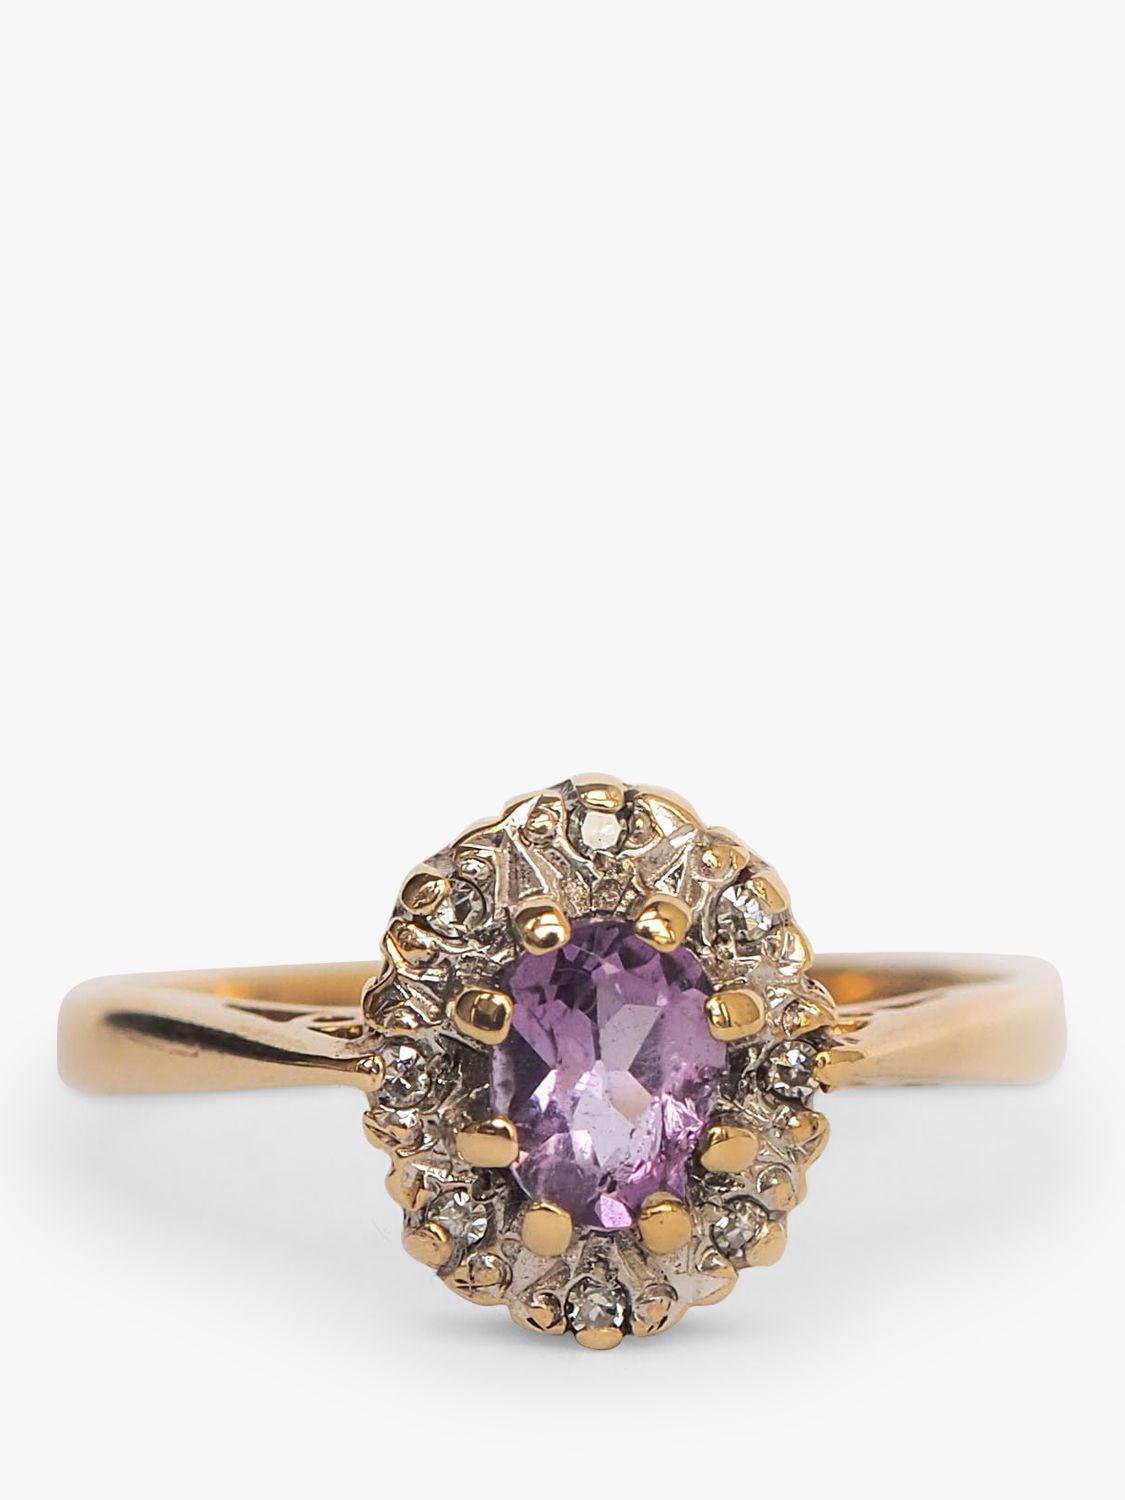 L & T Heirlooms Second Hand 9ct Yellow Gold Amethyst and Diamond Dress Ring, Gold